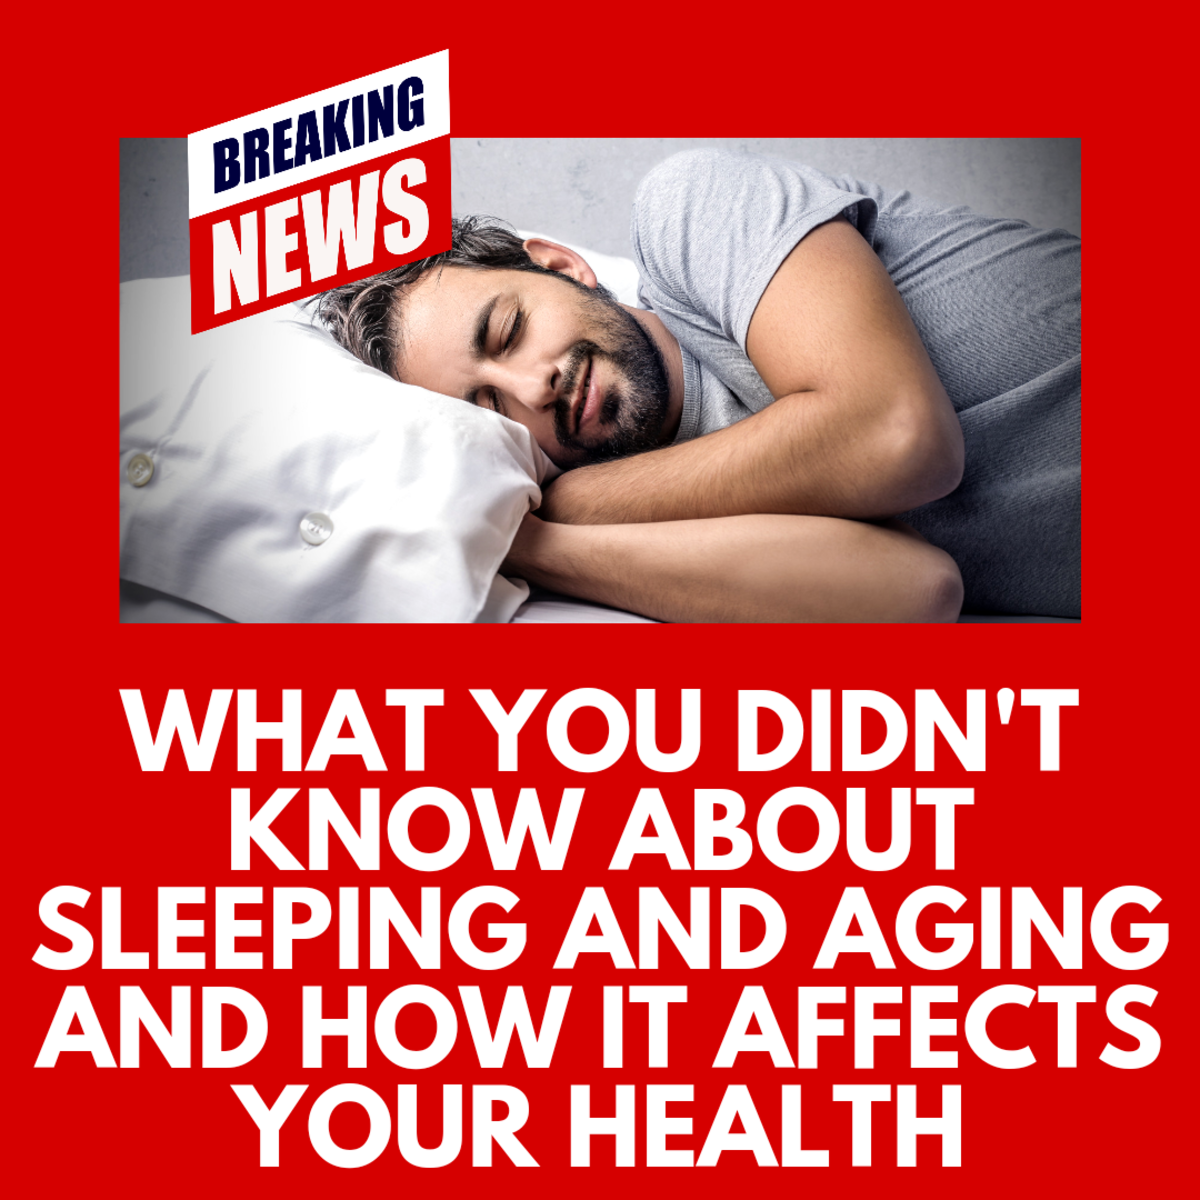 What You Didn't Know About Sleeping And Aging